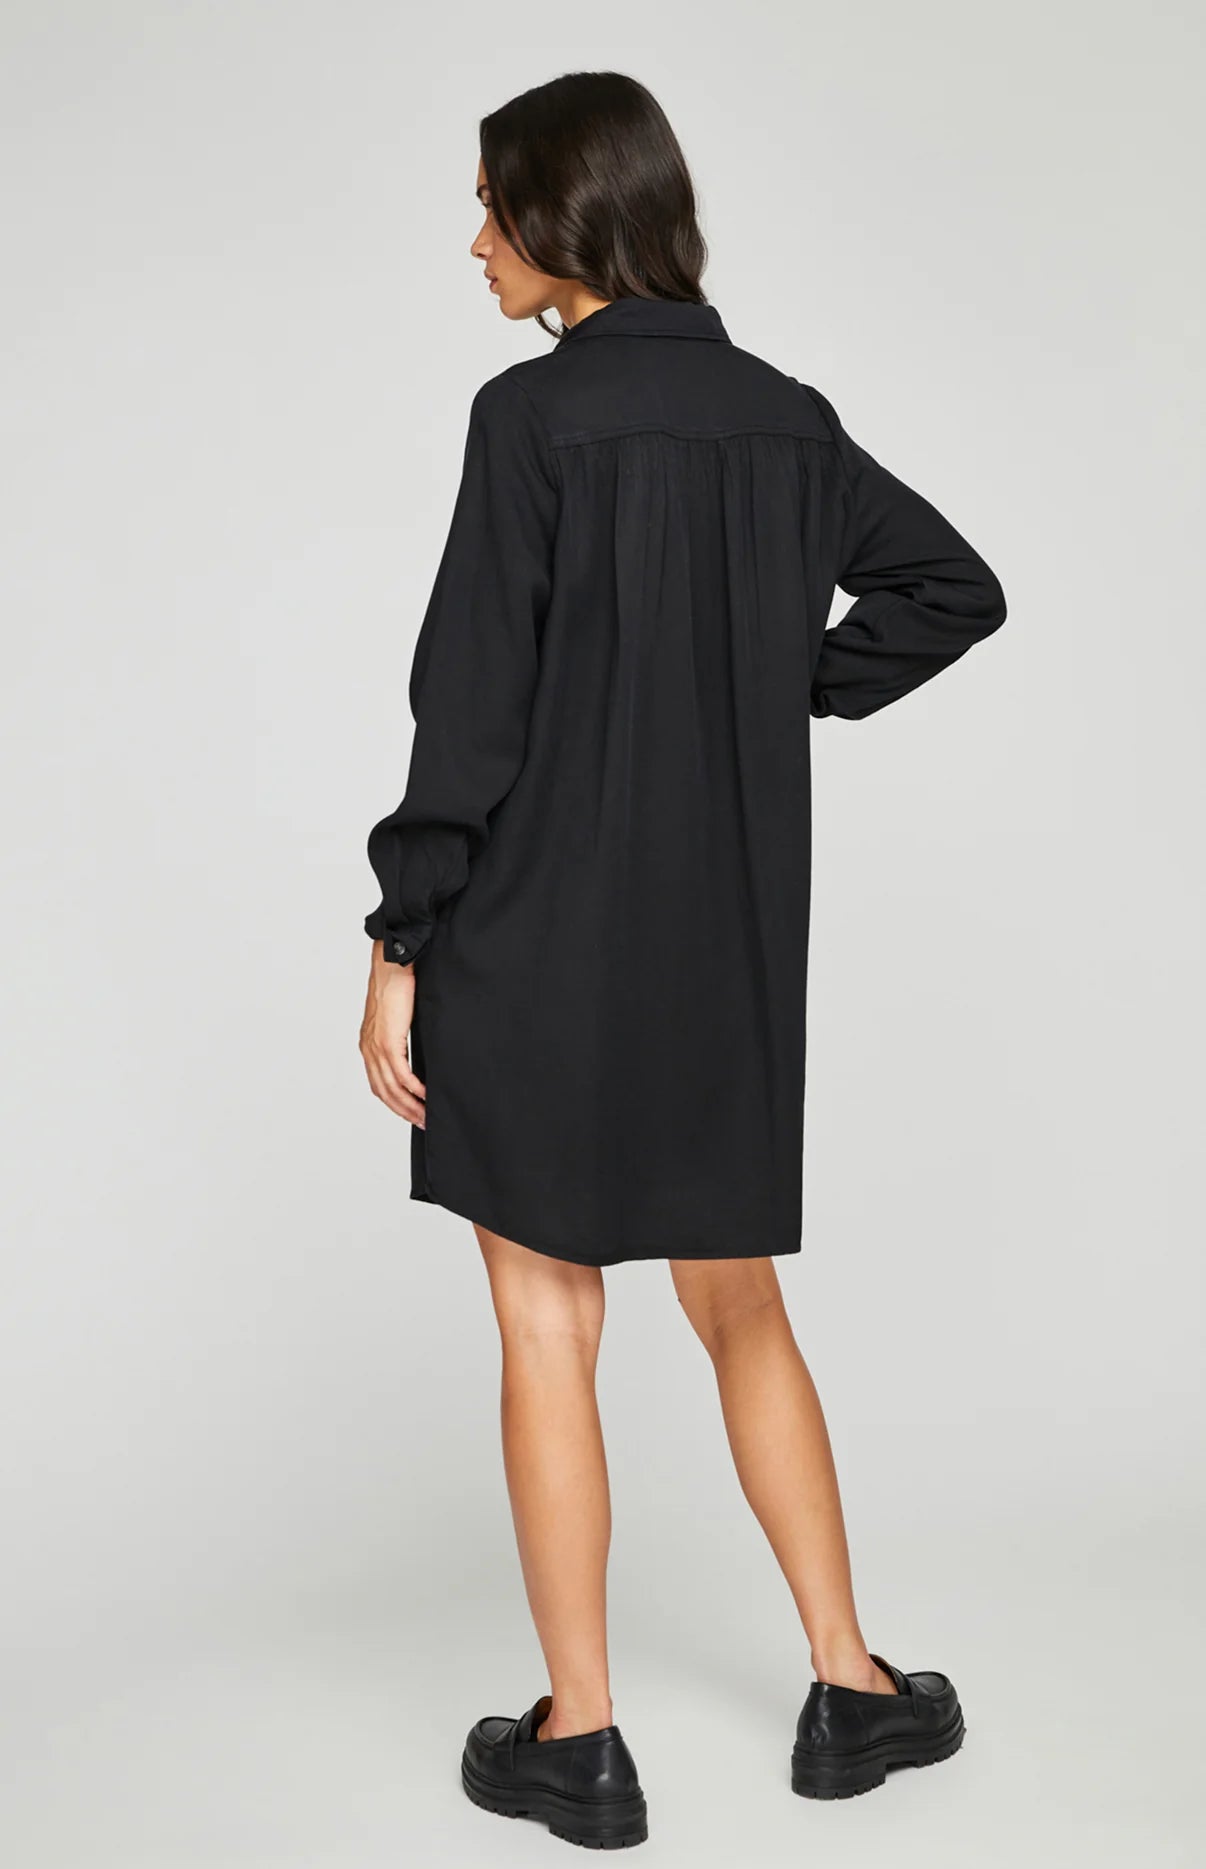 Load image into Gallery viewer, back view of woman wearing a black button up shirt dress
